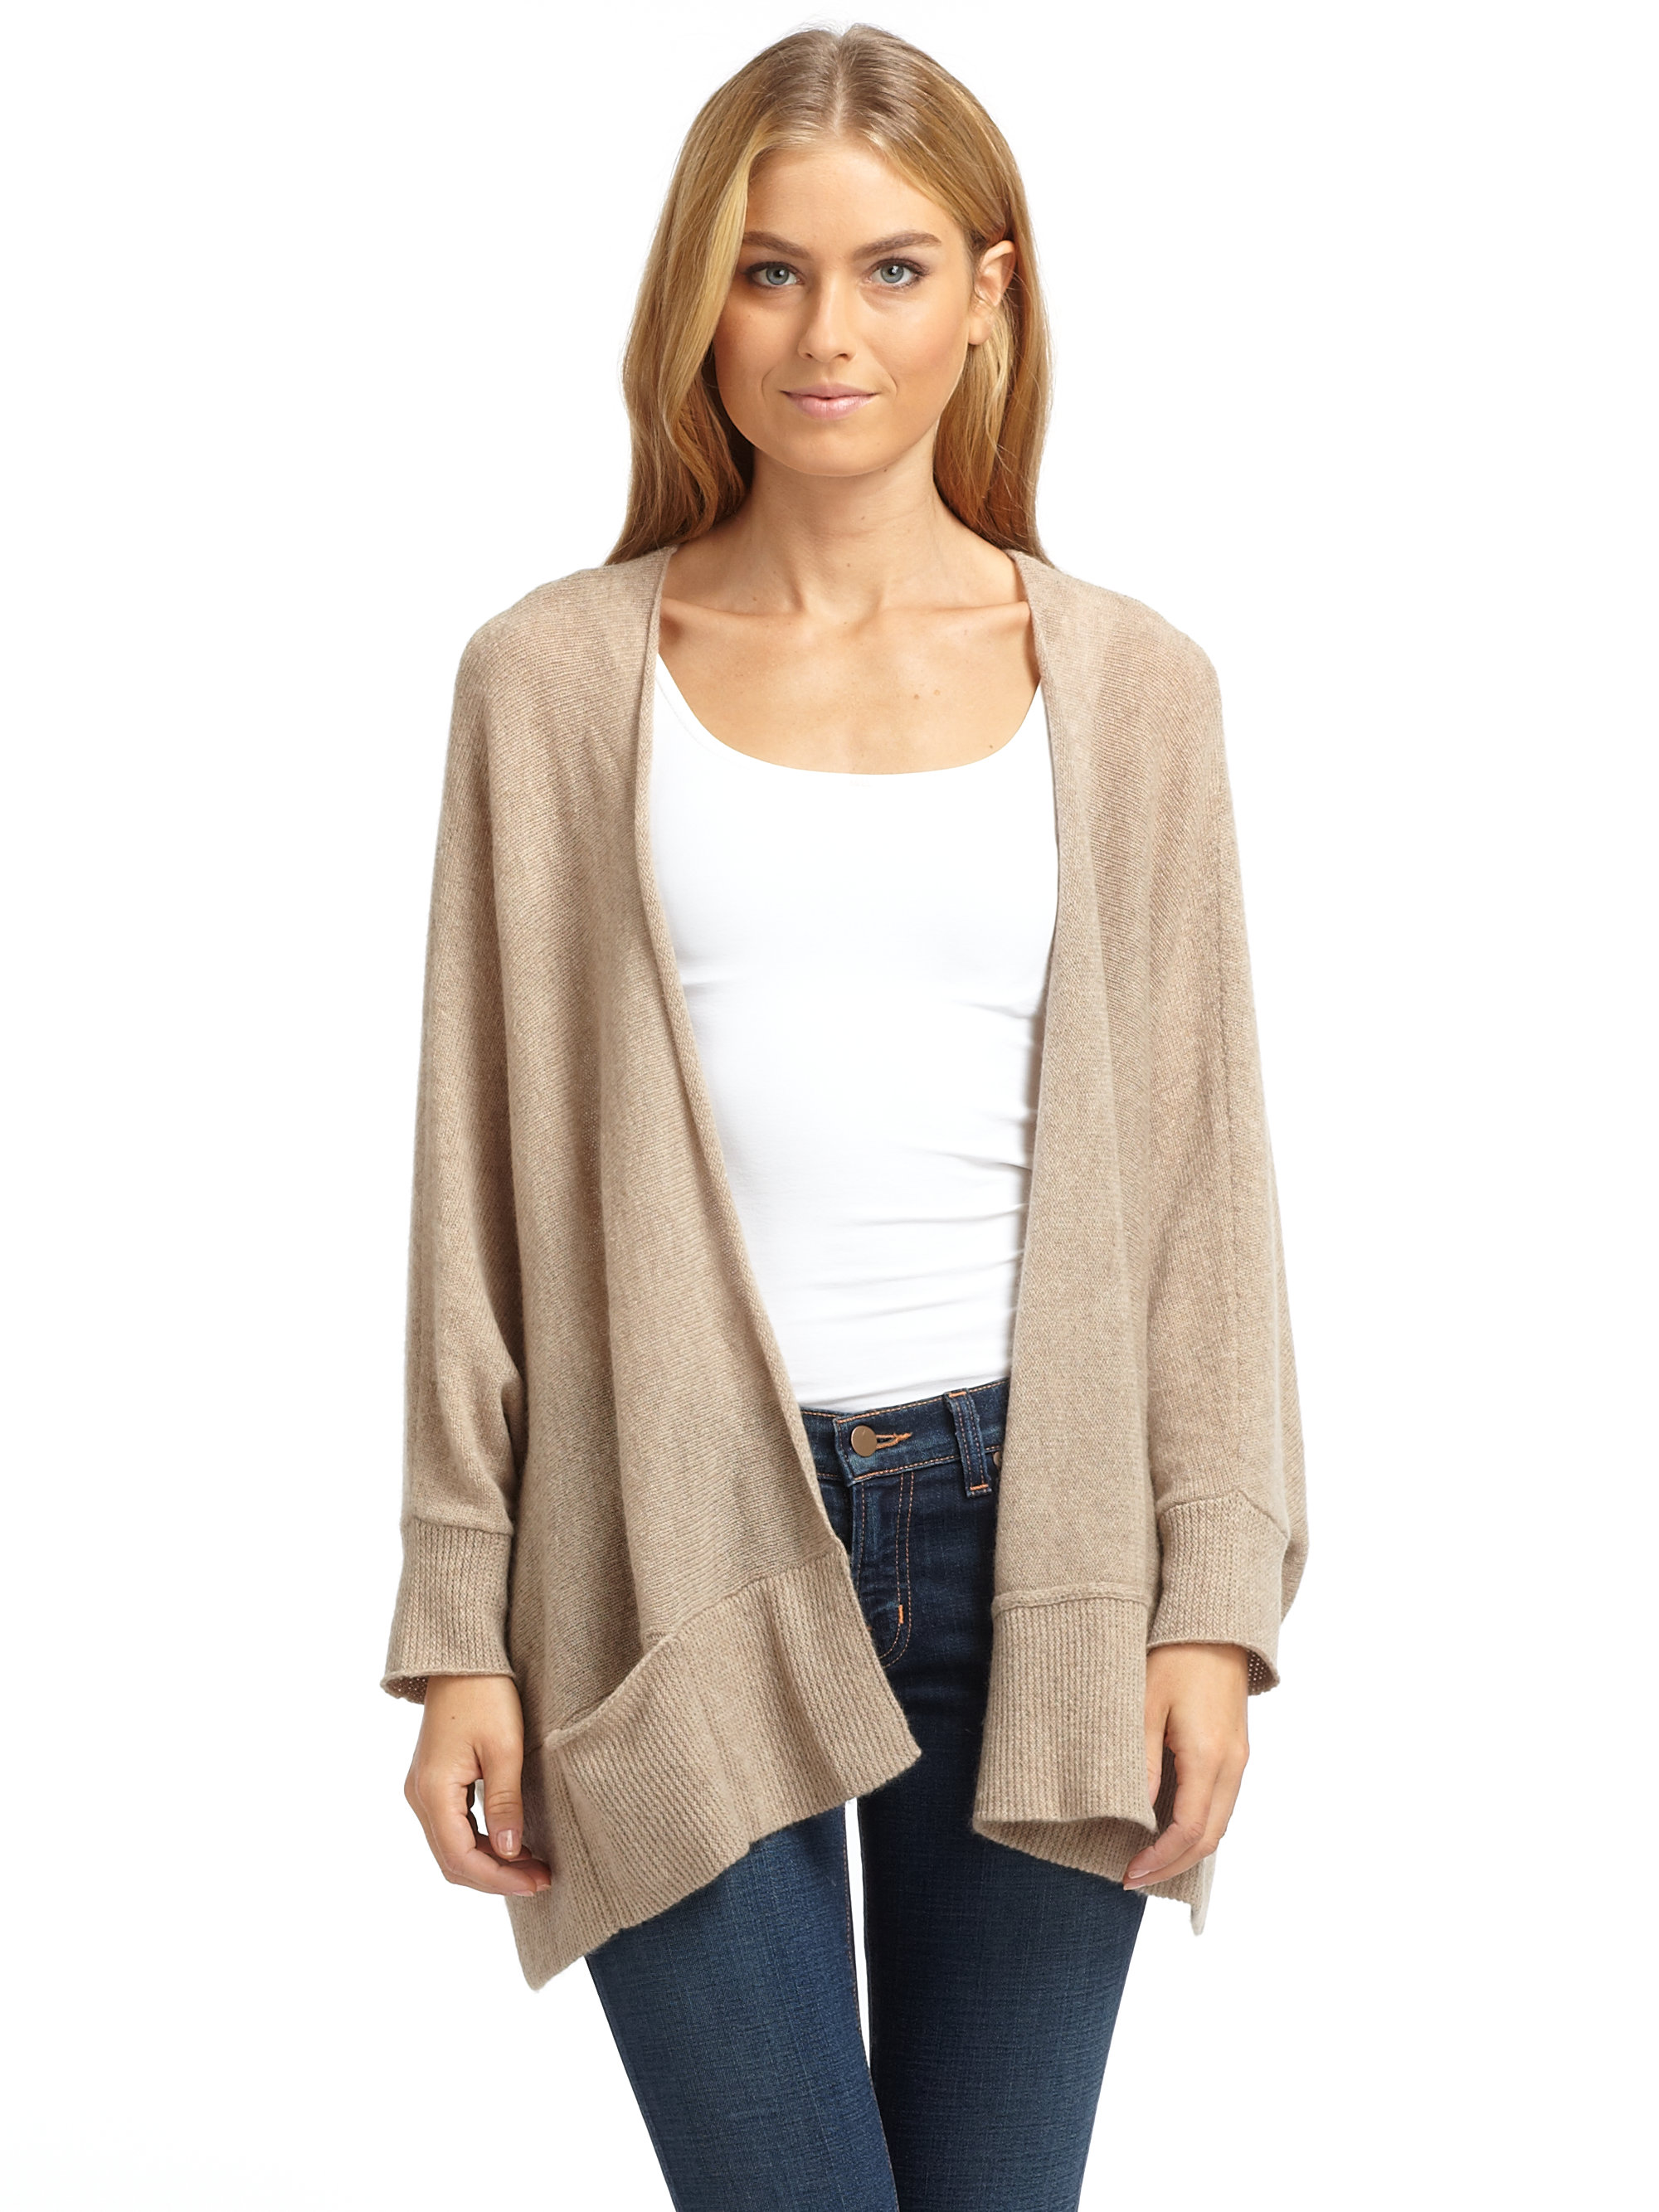 Qi new york Adele Cashmere Cocoon Cardigan in Beige (natural) | Lyst